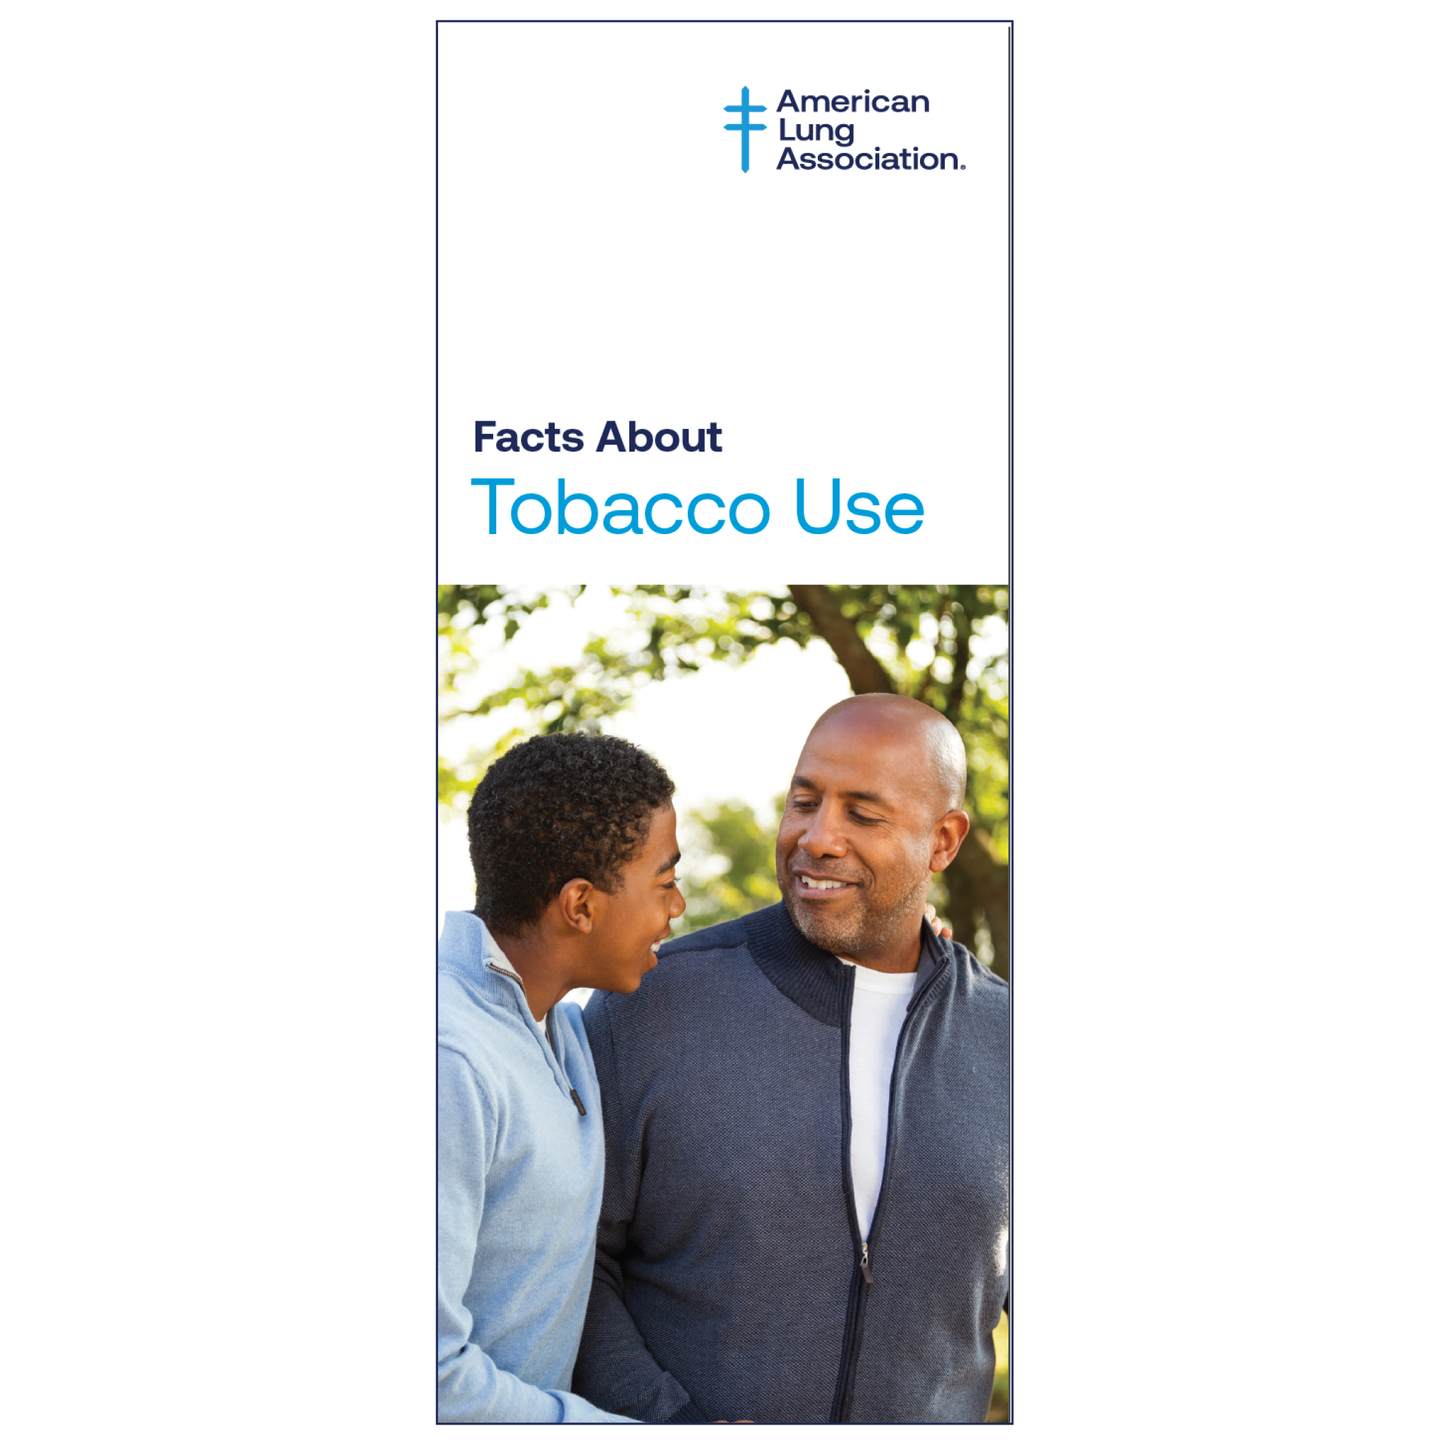 Facts About Tobacco Use